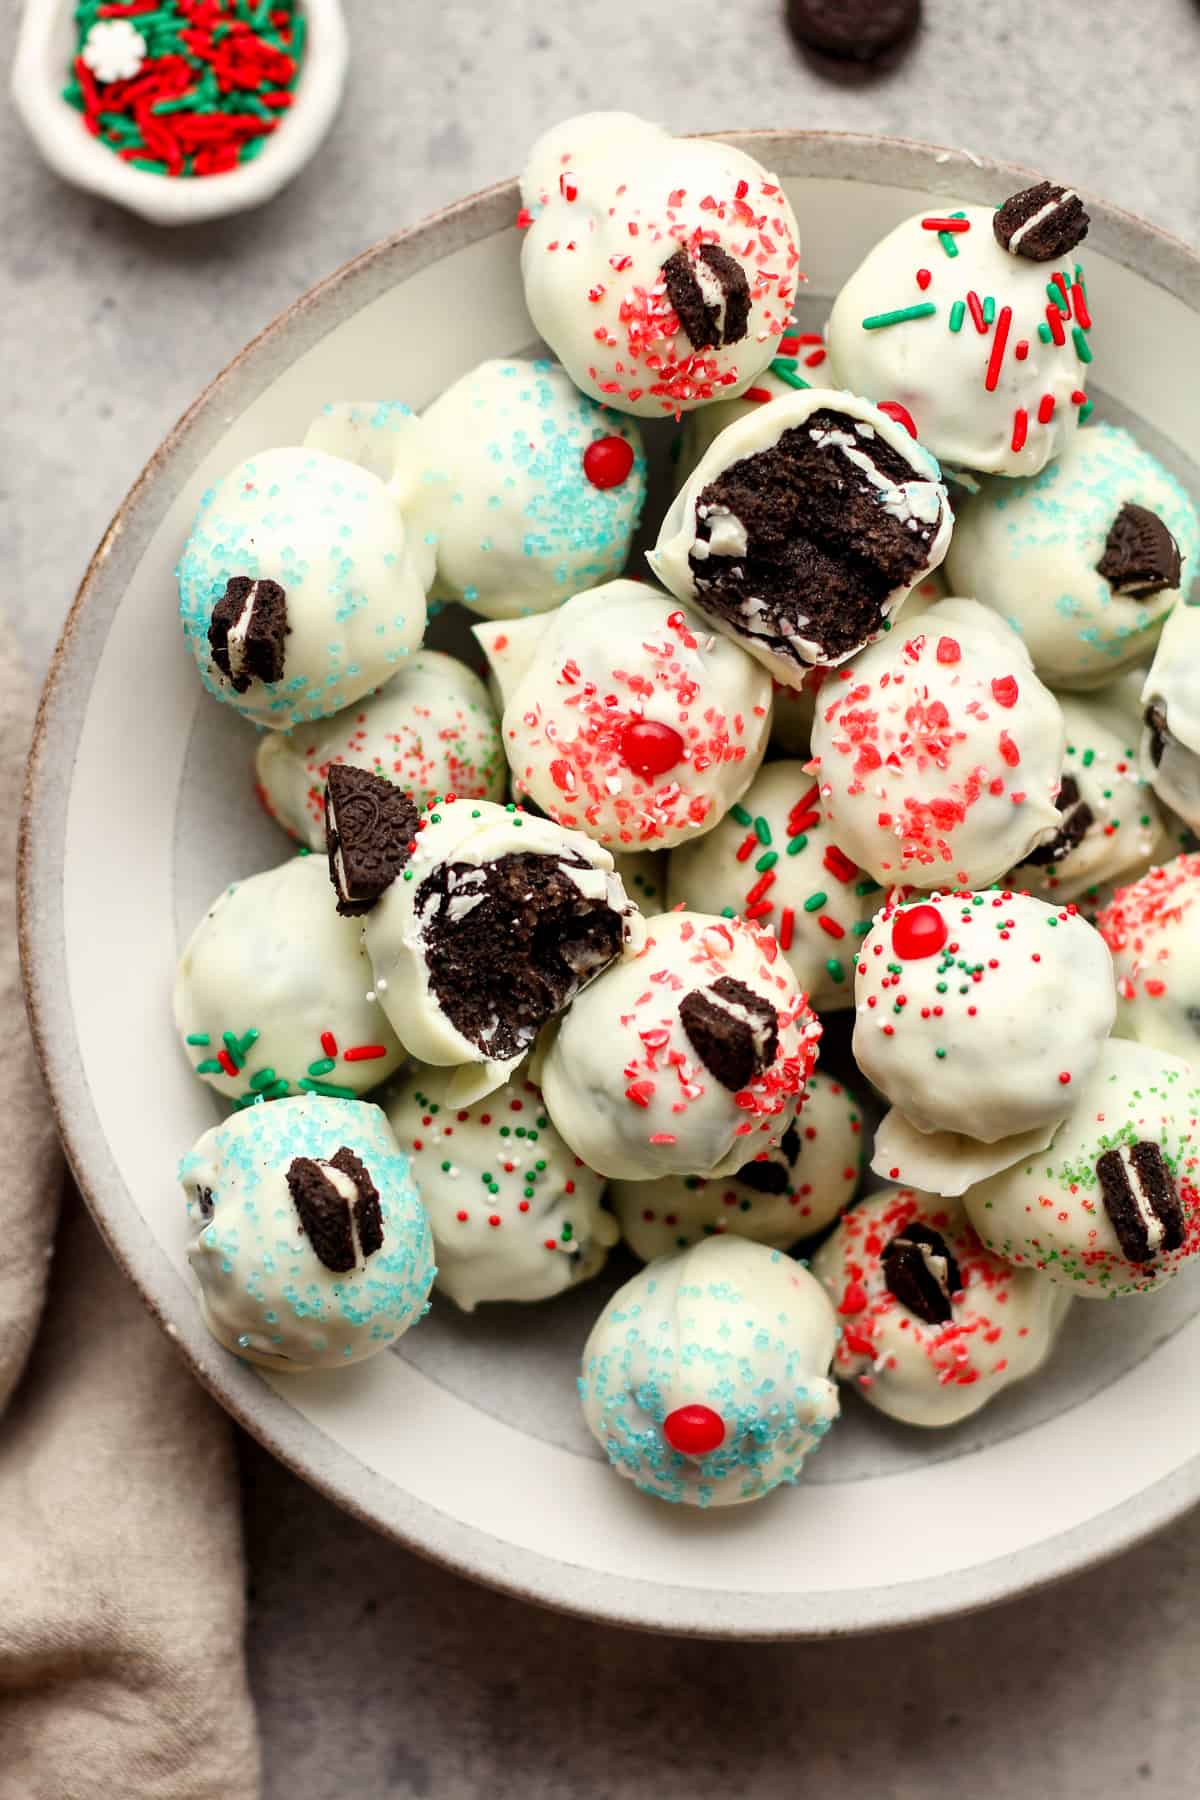 A bowl of White Chocolate Oreo balls decorated with Christmas sprinkles.